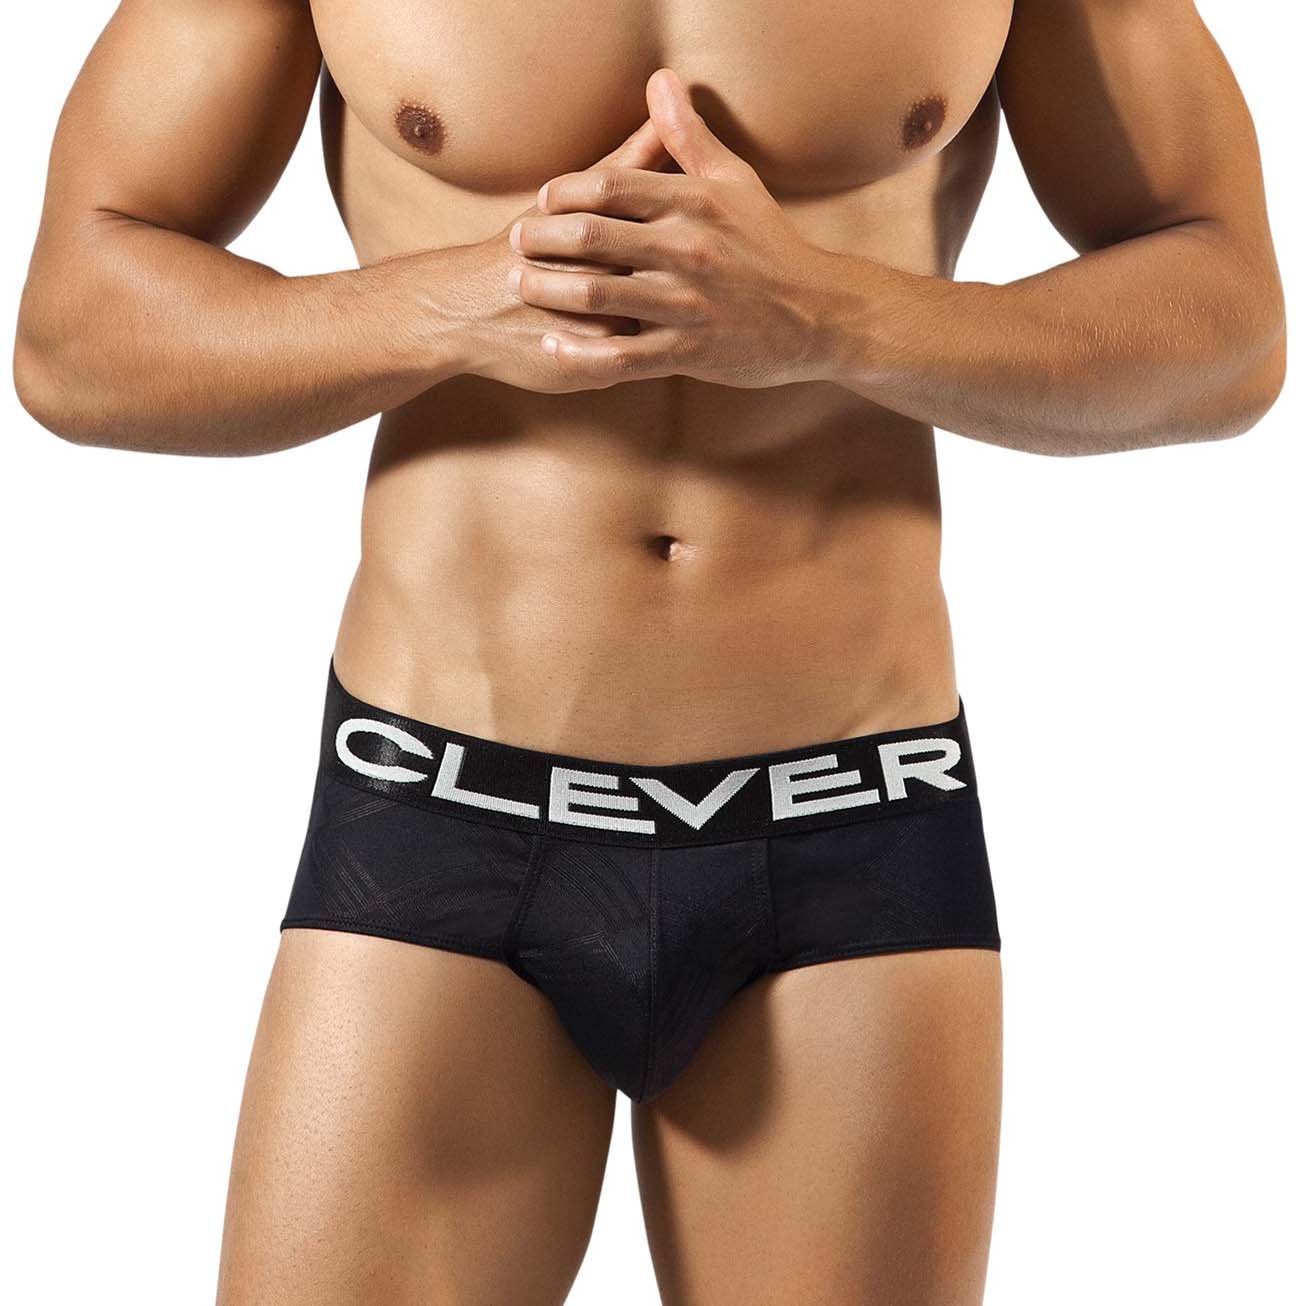 Slip Clever 5160